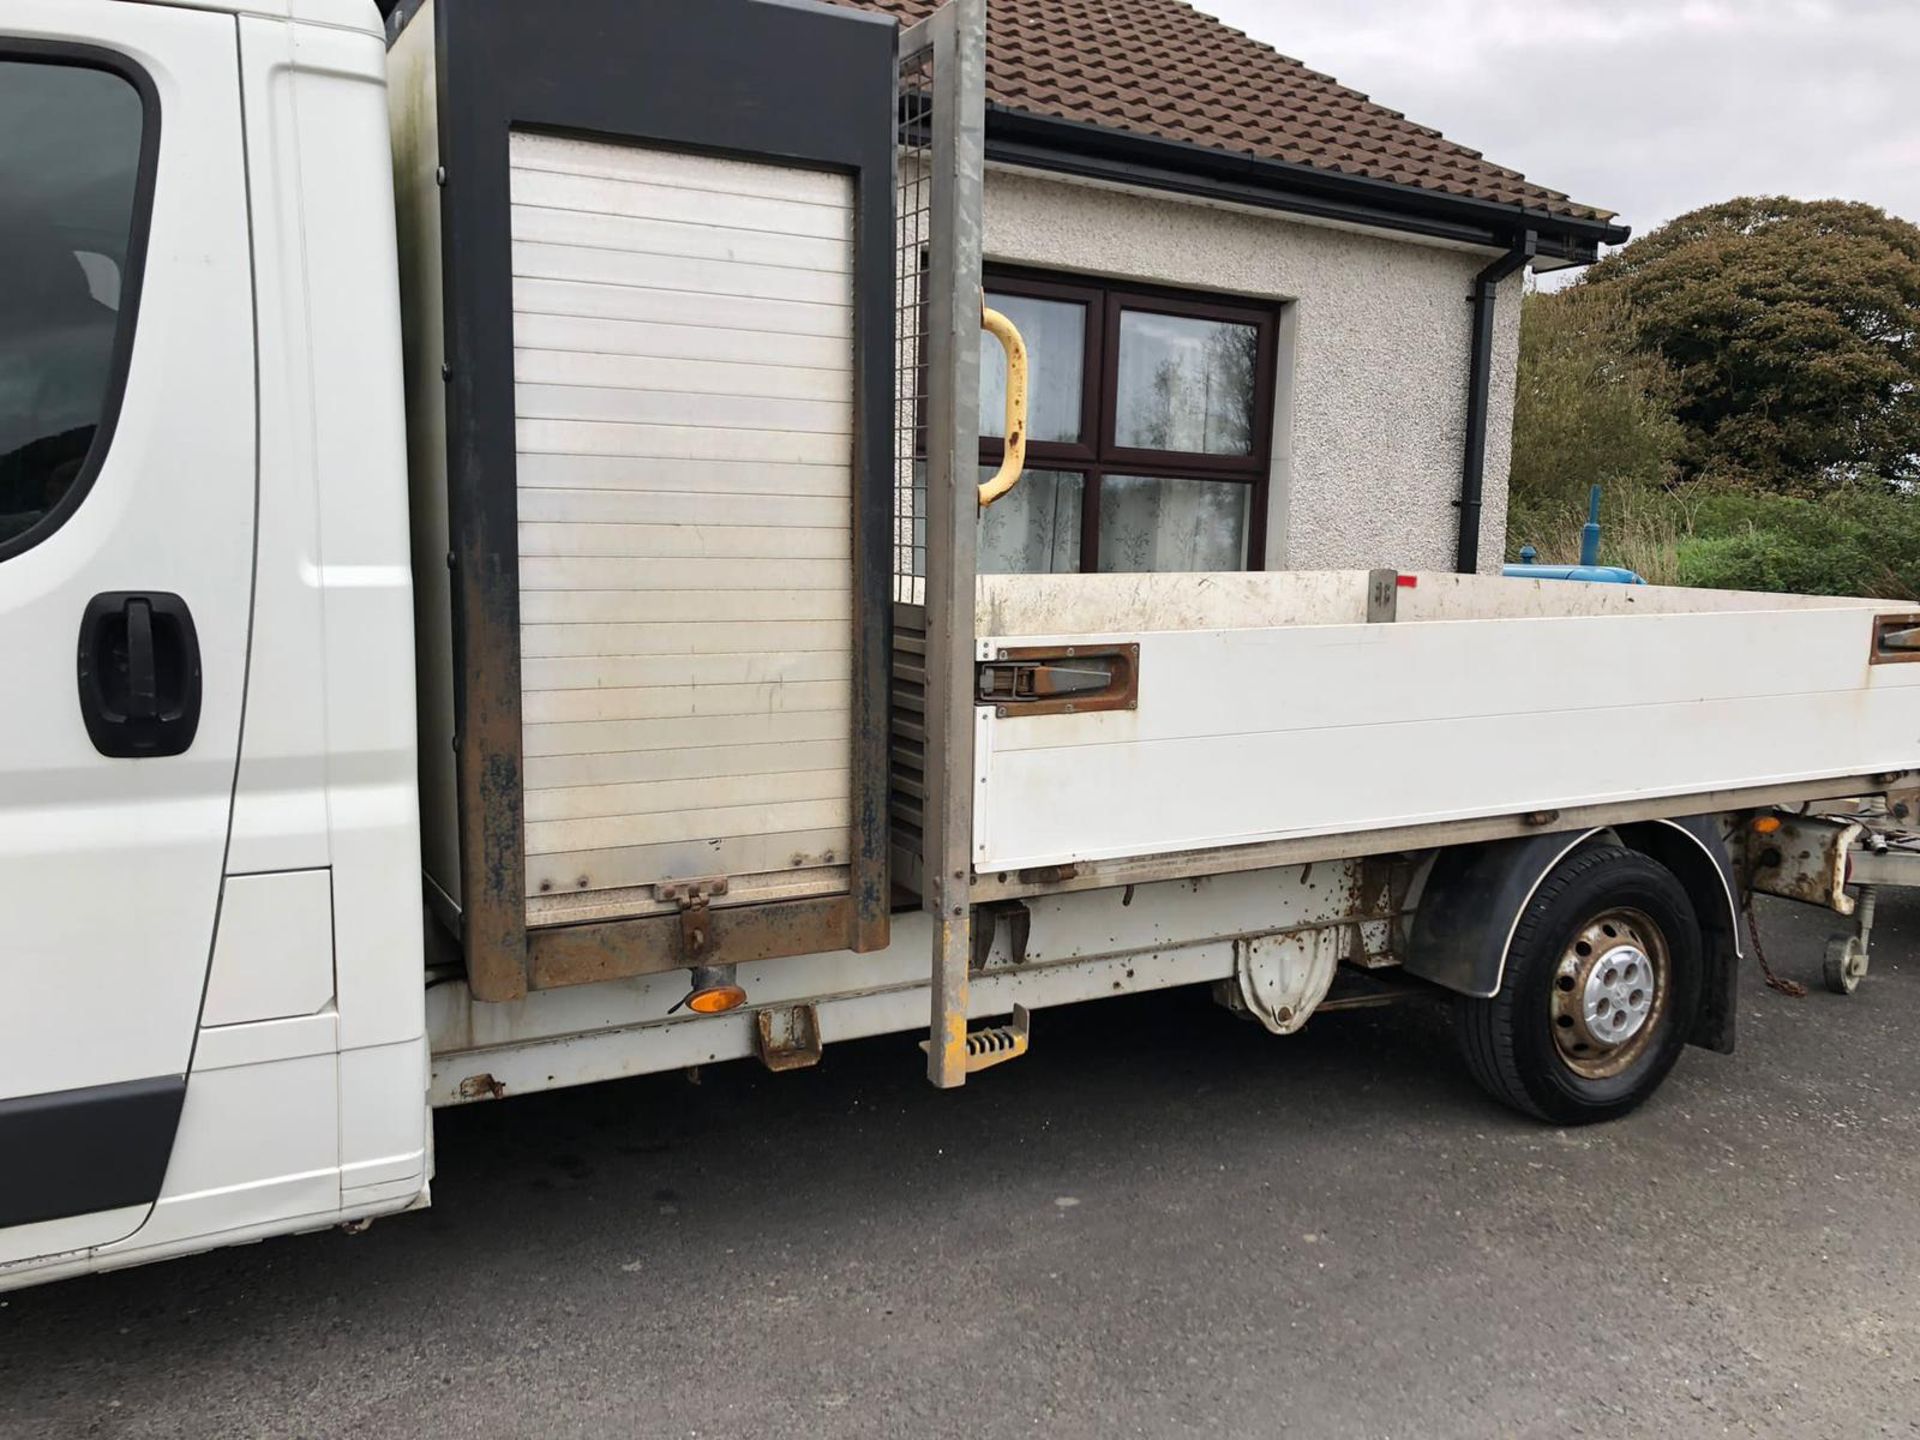 2014 Peugeot Boxer 335 L3 Hdi Flat bed 67k Location N.Ireland - Image 9 of 9